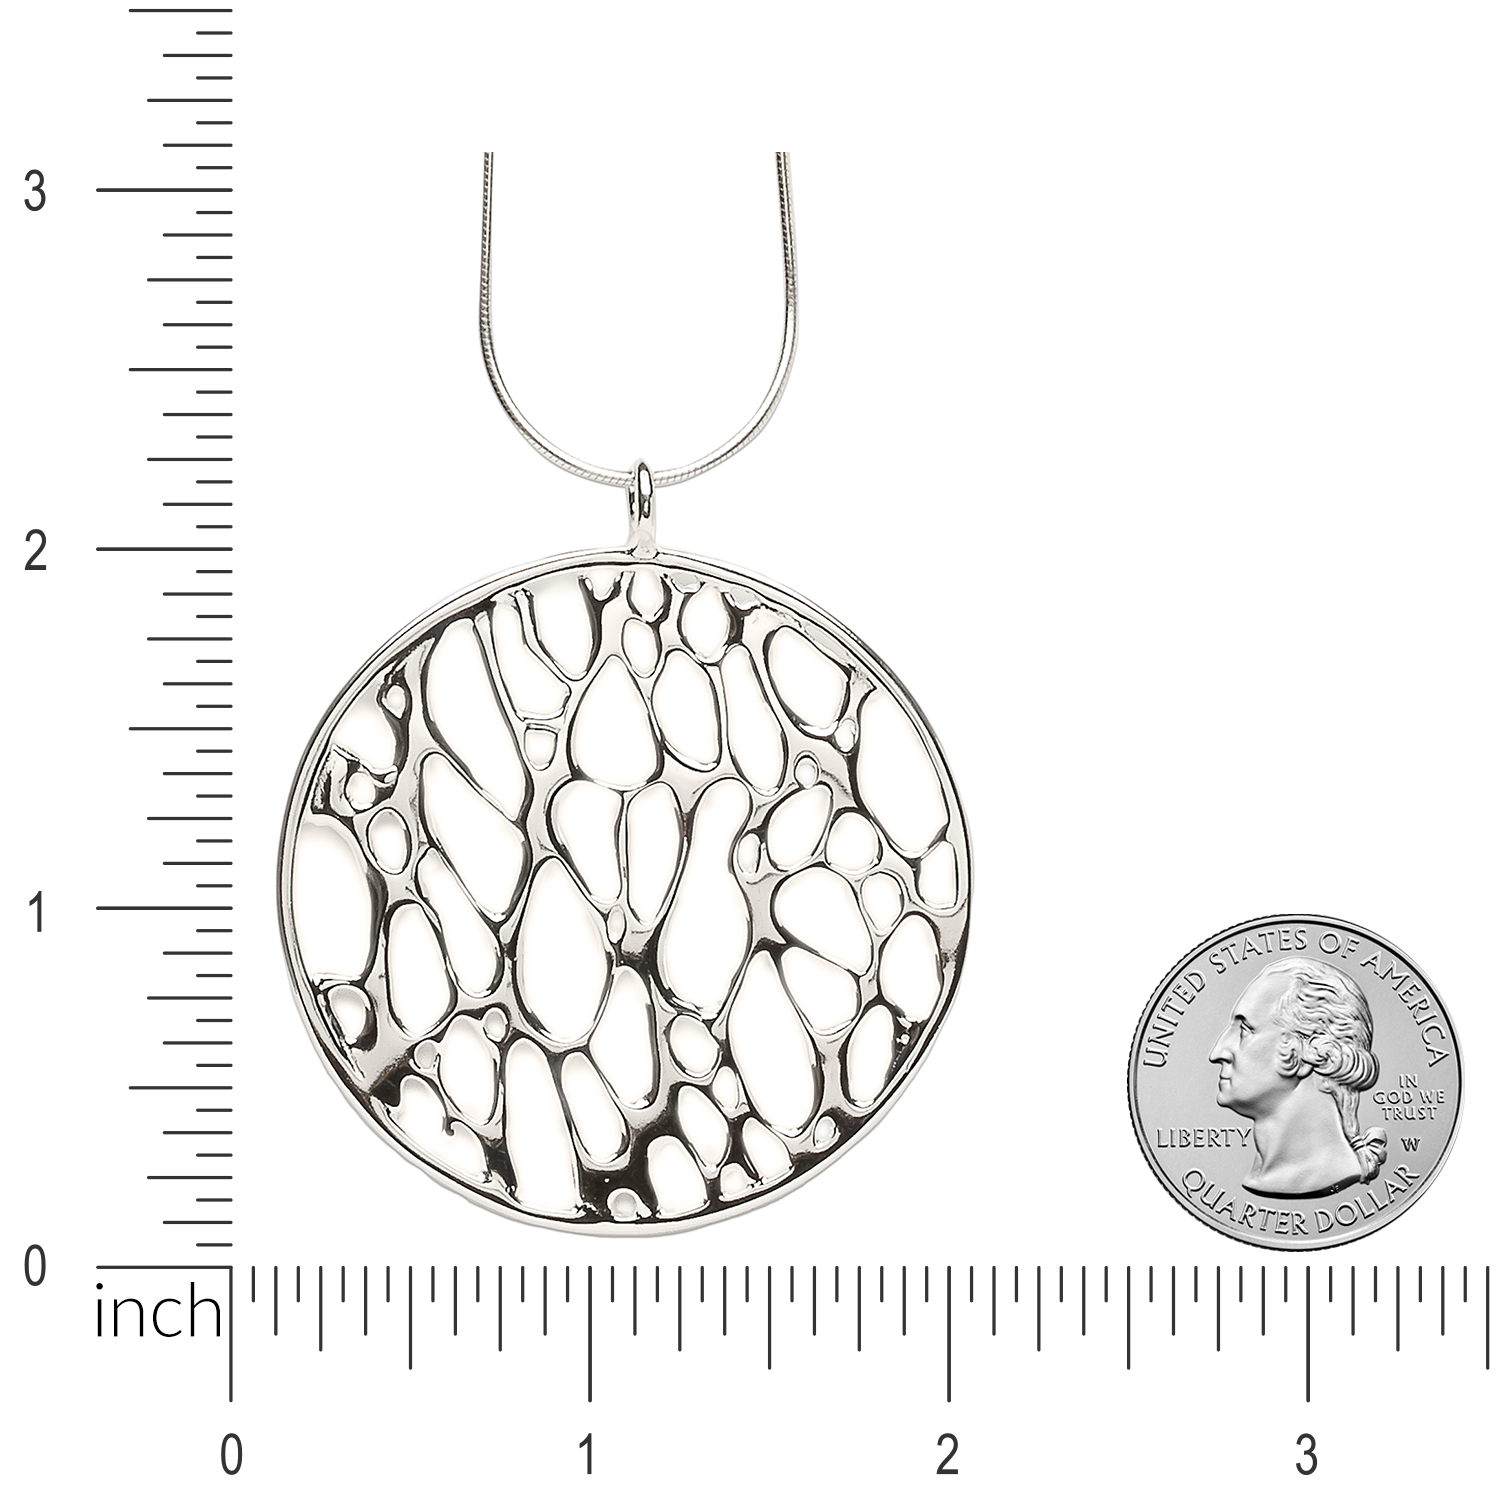 Image of large framed circle prickly pear pendant with ruler and quarter for size comparison.